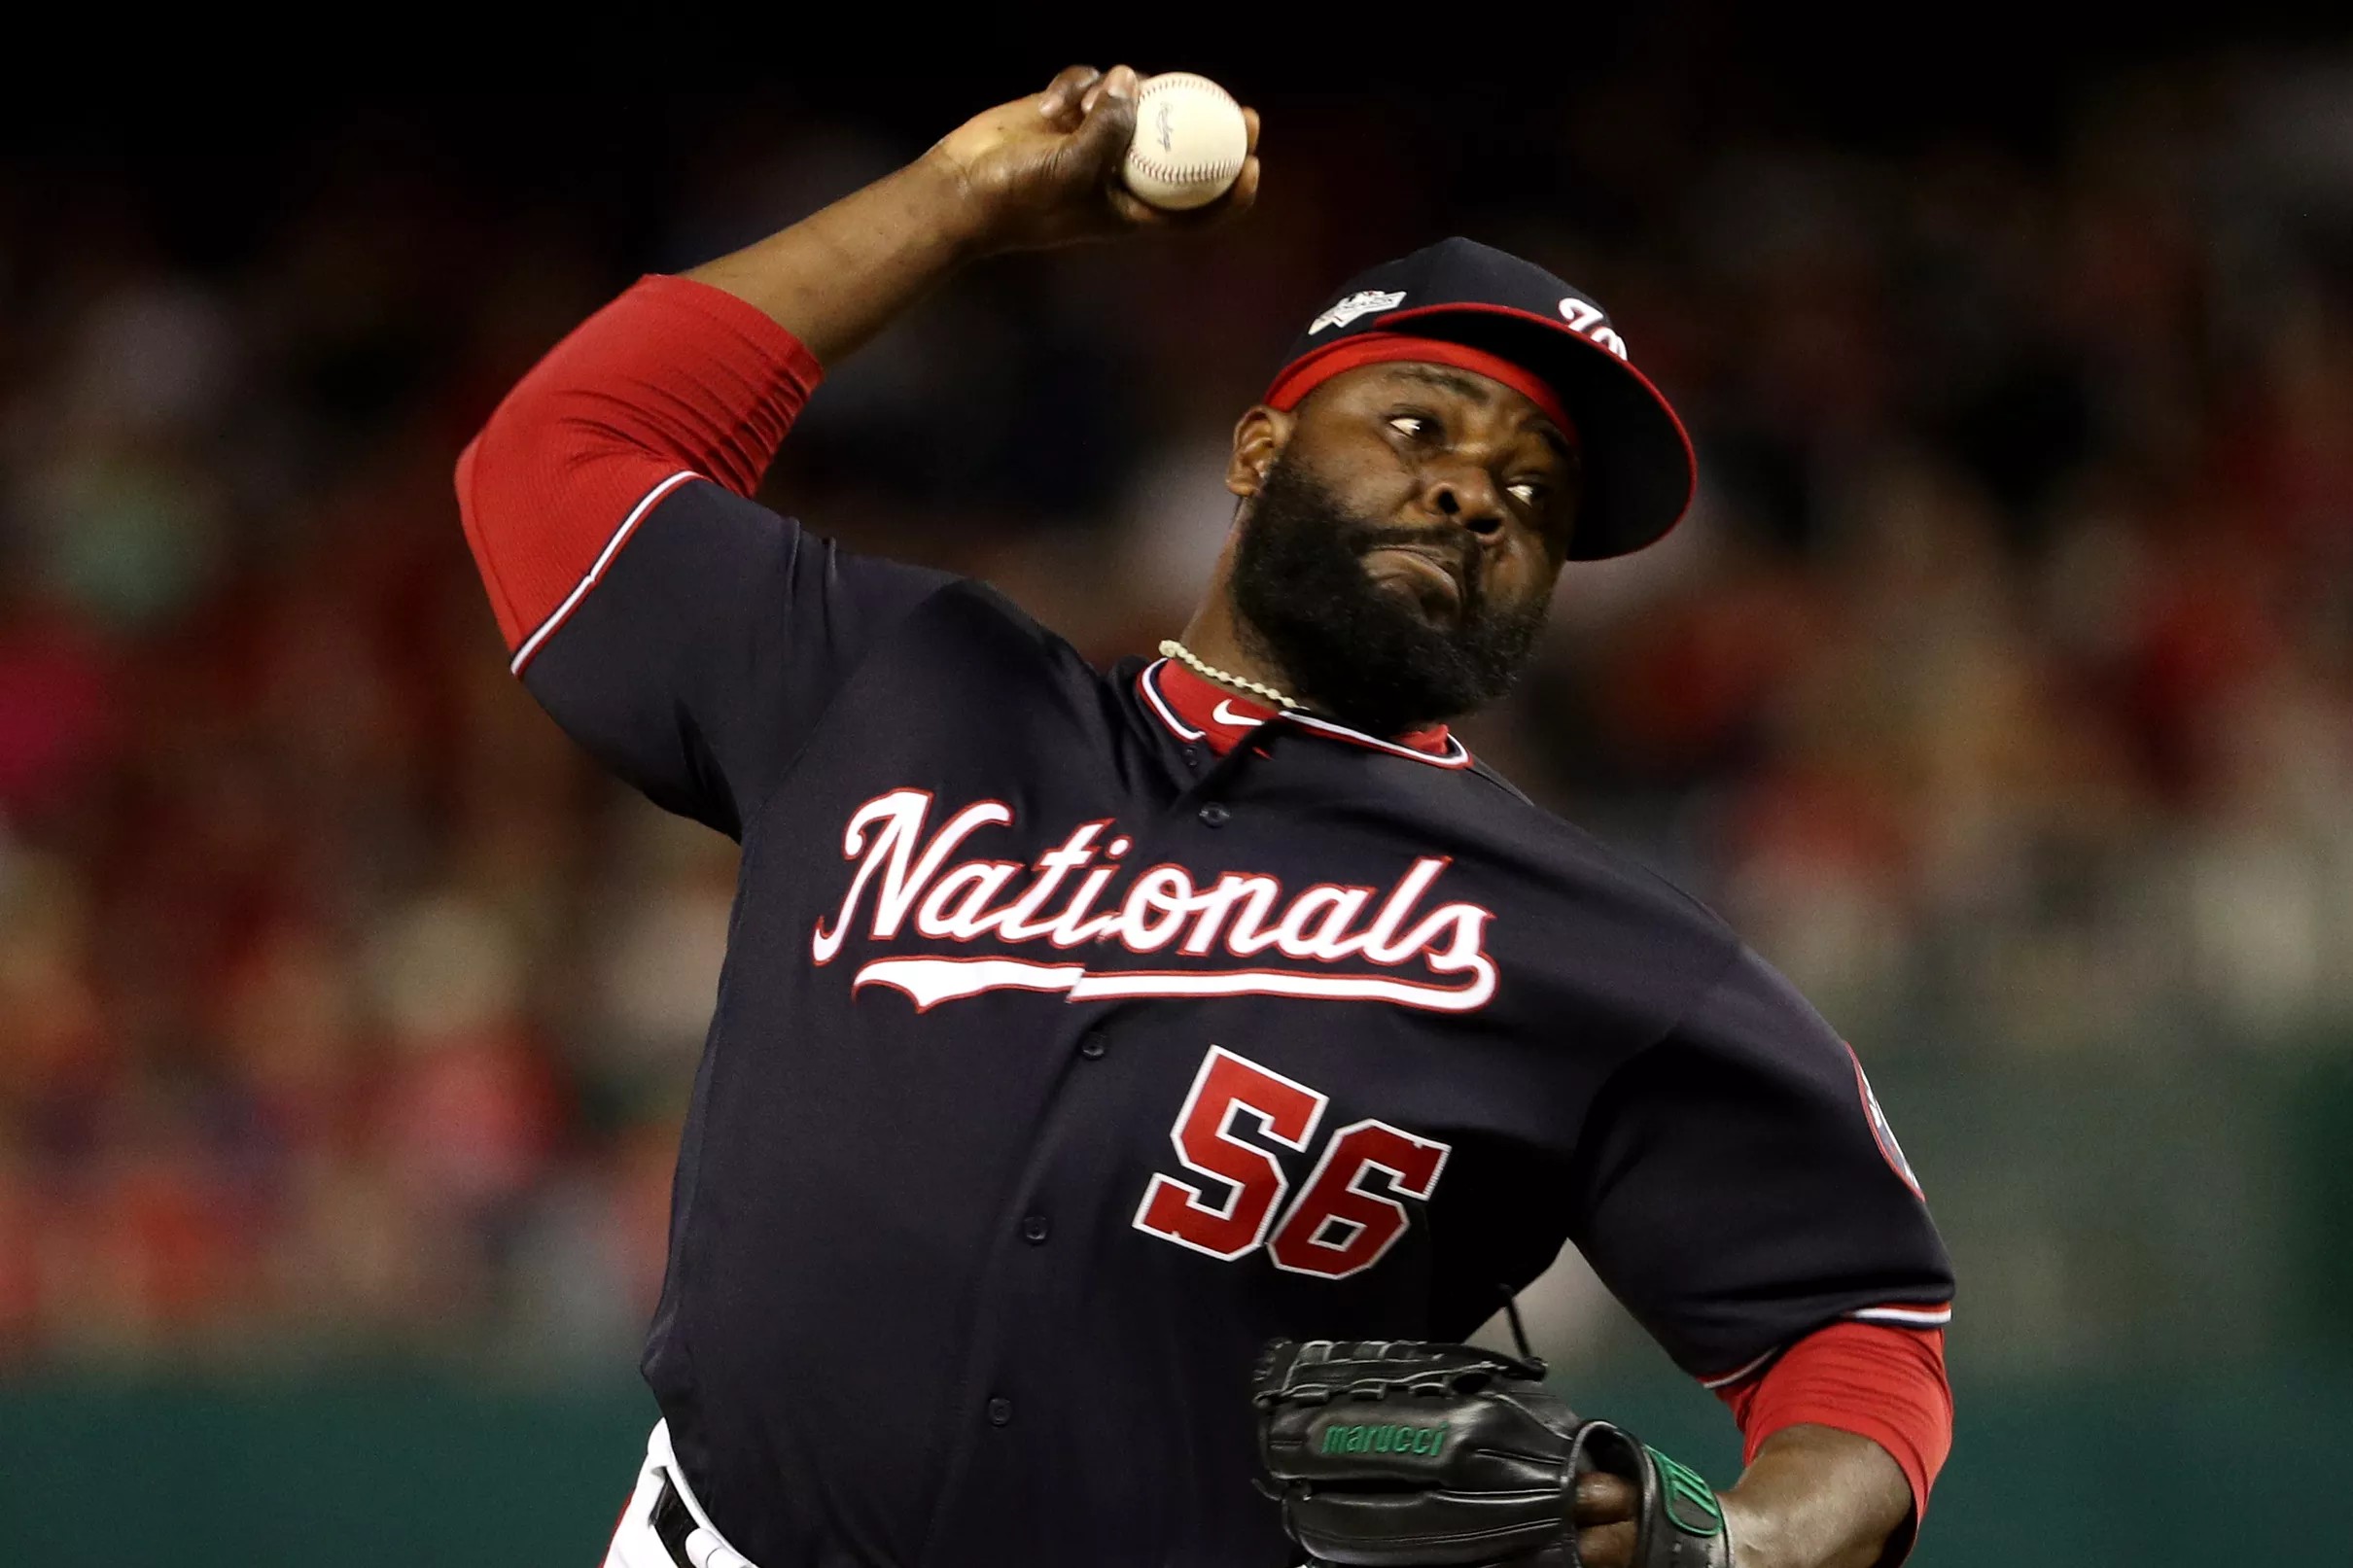 Fernando Rodney is going to the 2019 World Series